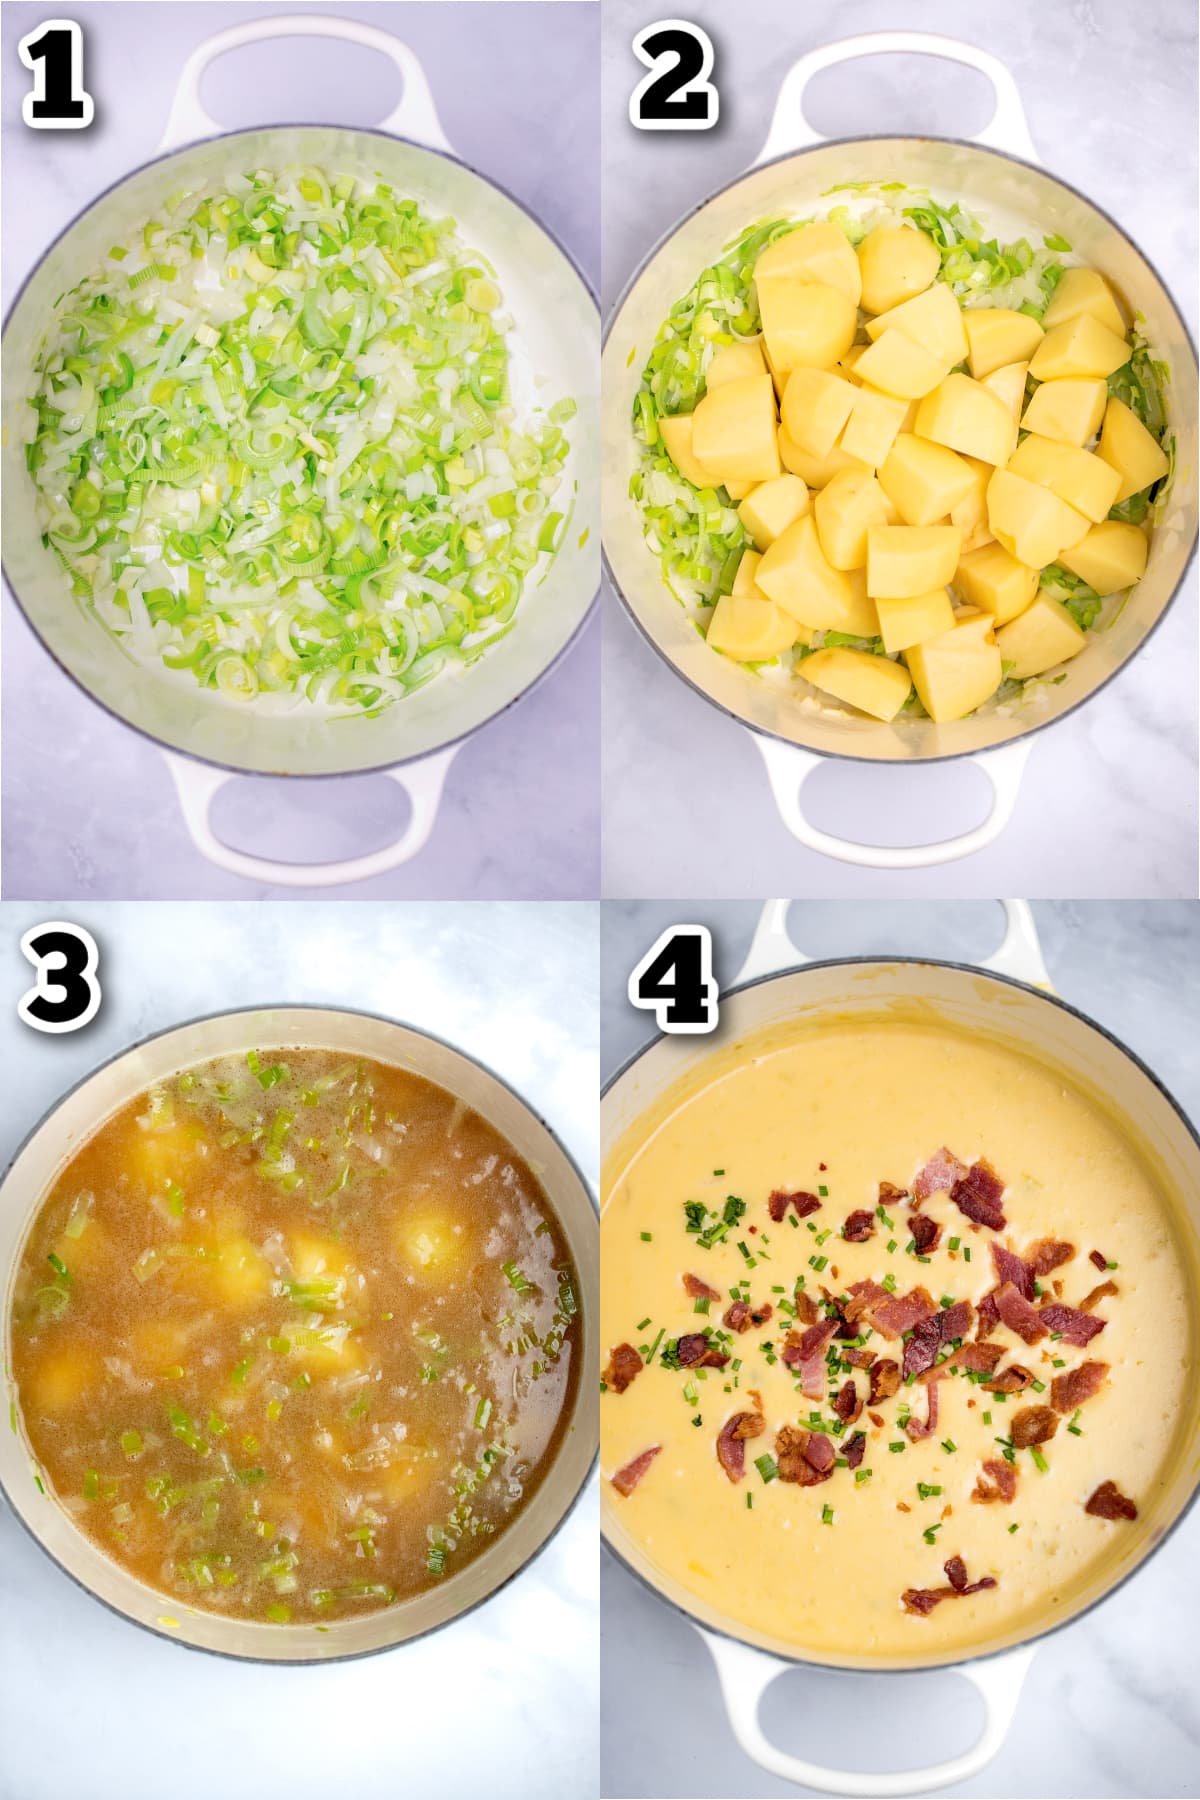 Step by step photos for how to make potato cheese soup.